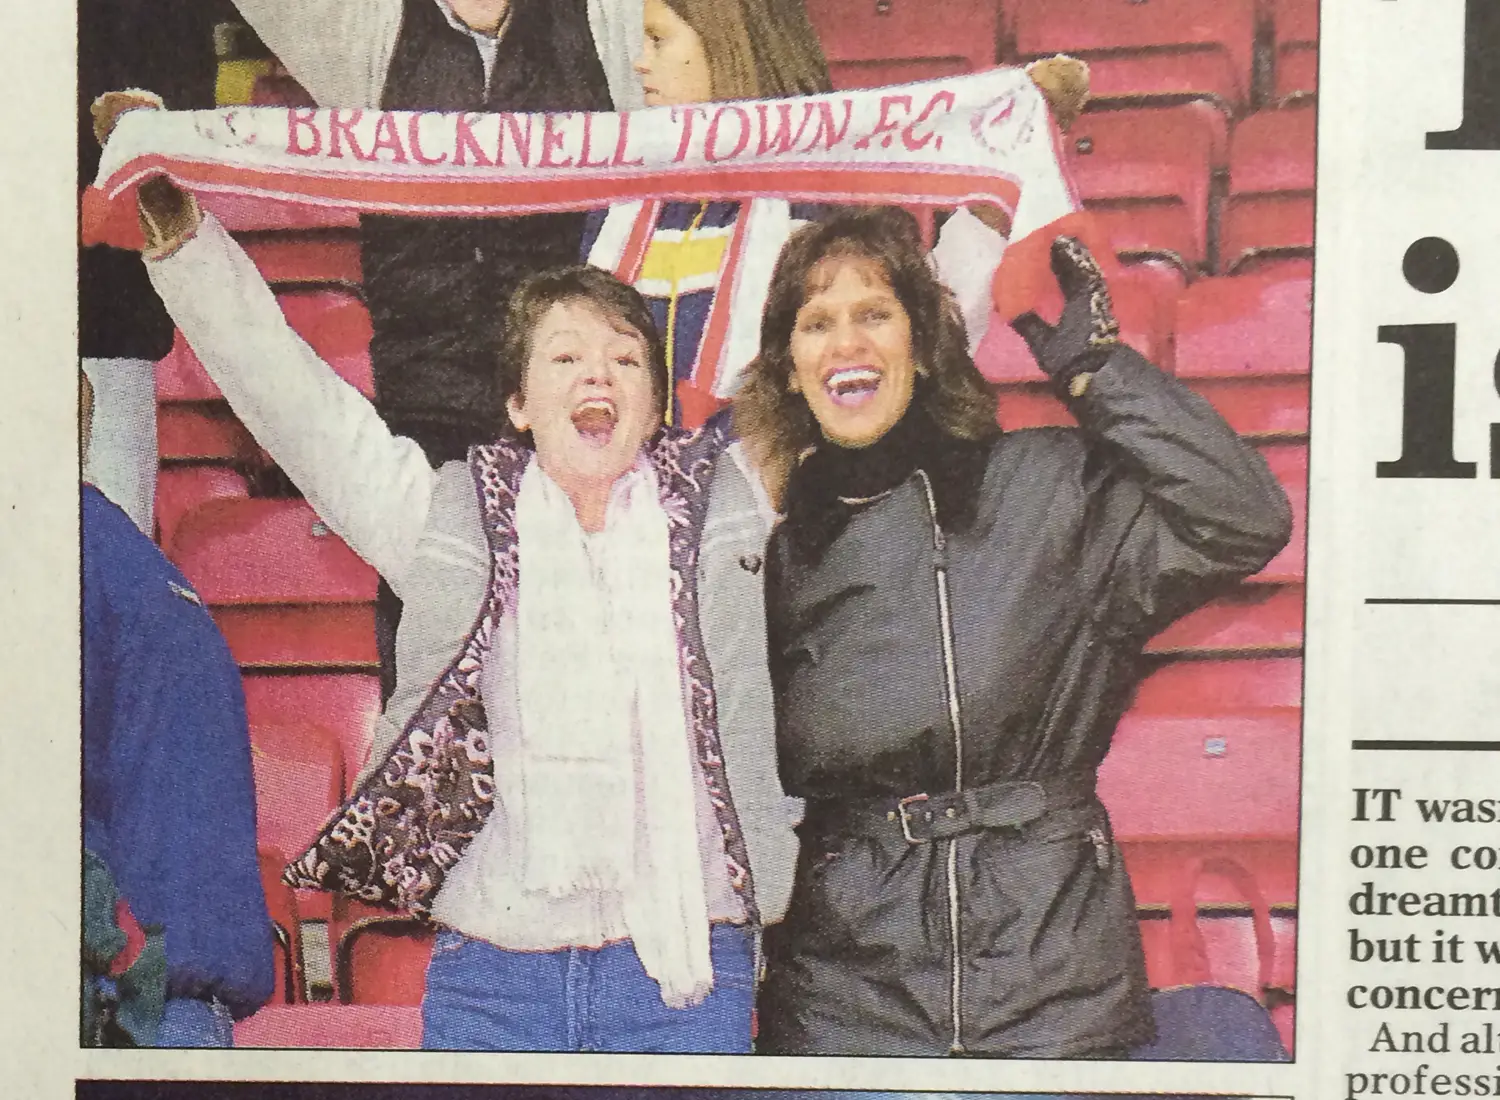 Bracknell Town supporters at Lincoln City FC for the 1999 FA Cup First Round Proper tie. Photo: Wokingham Times.